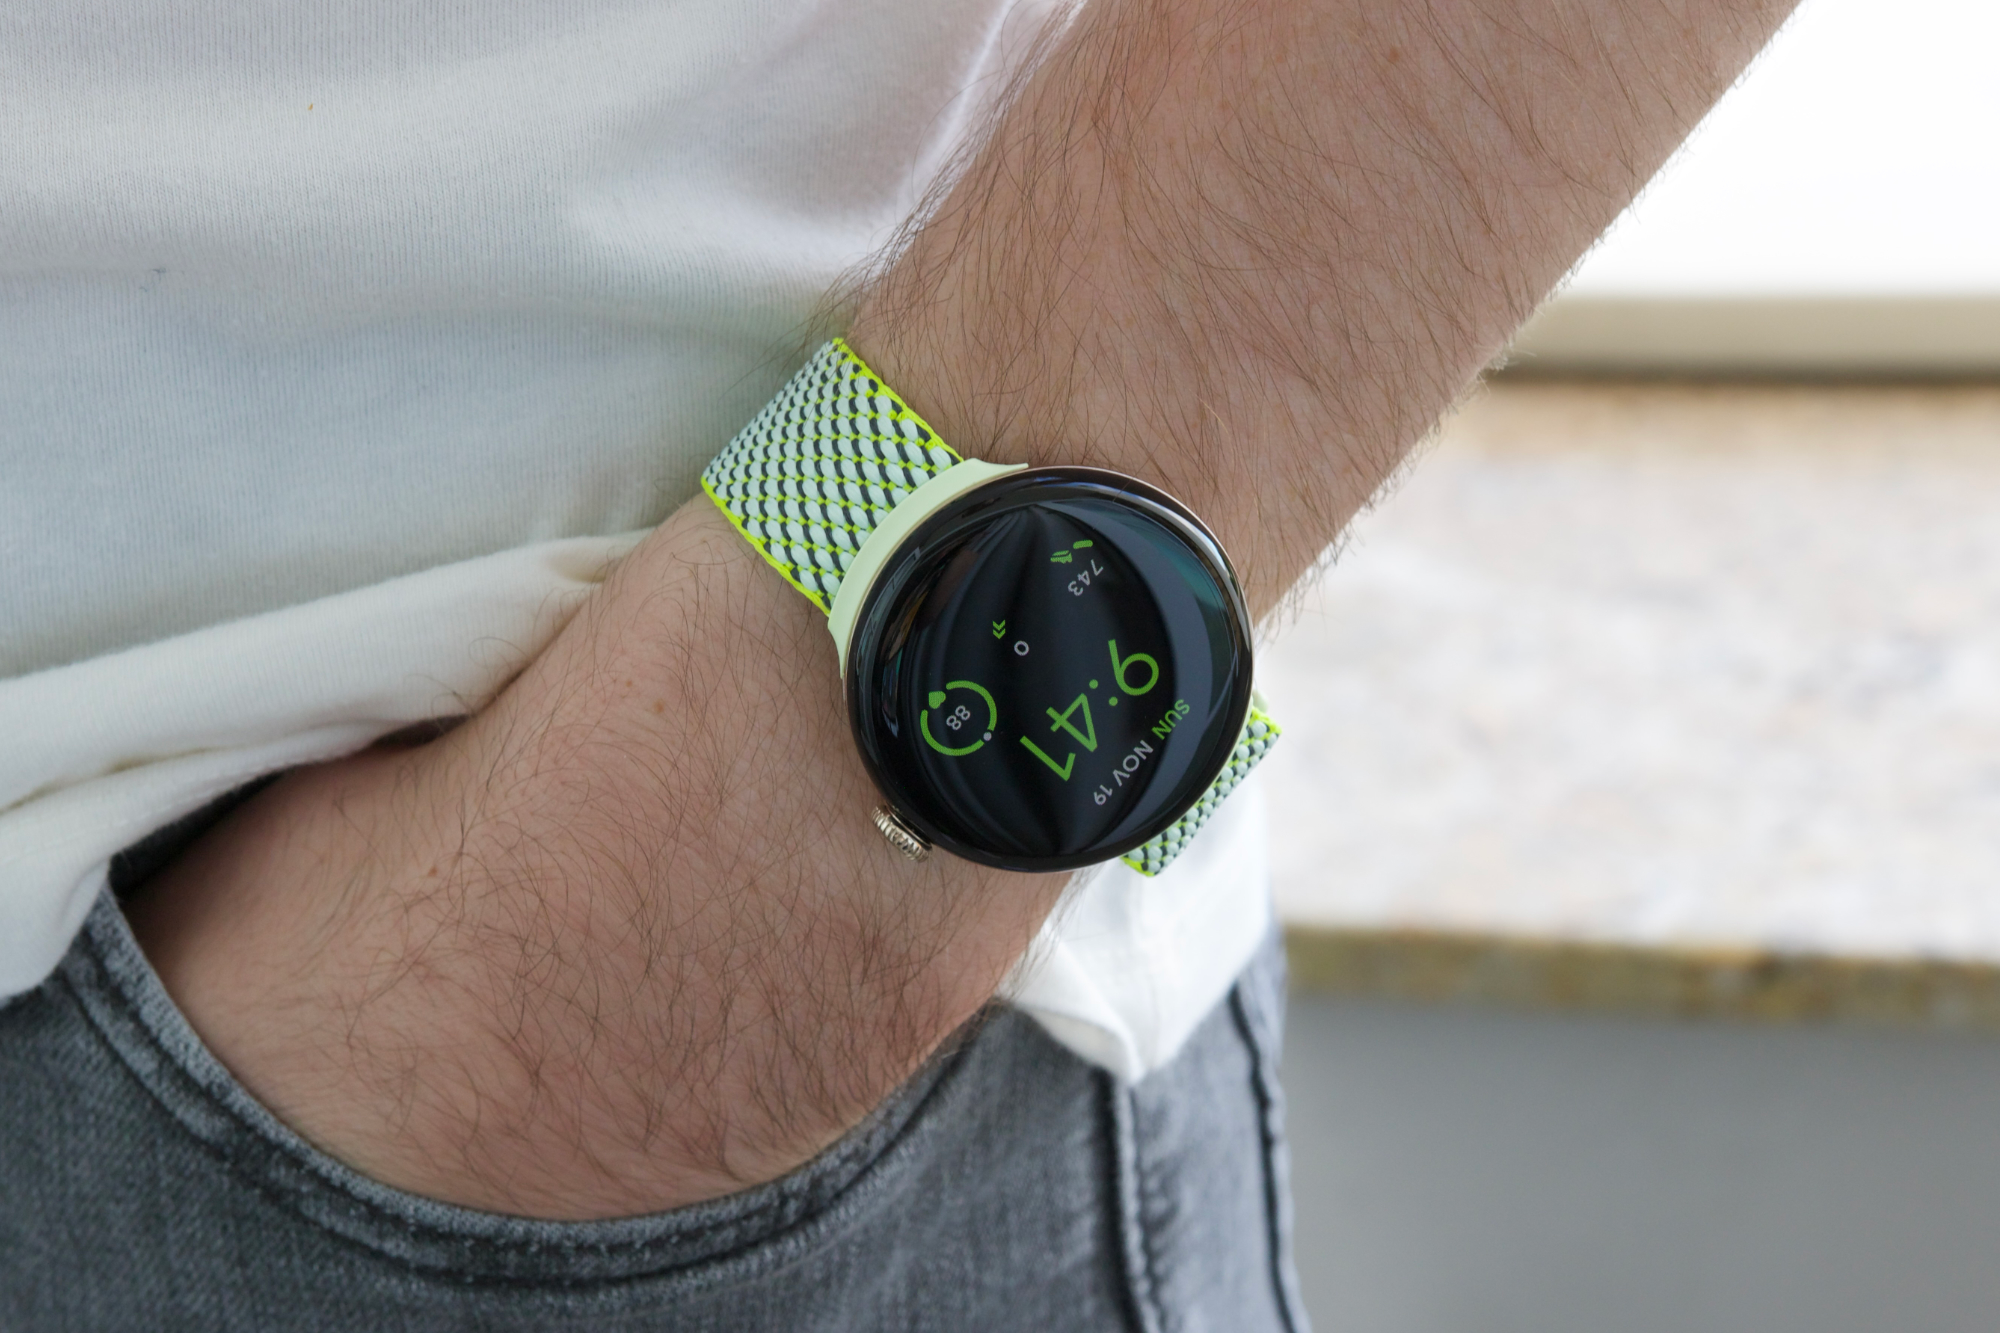 Someone wearing the Google Pixel Watch 2 with a yellow/green fabric band.